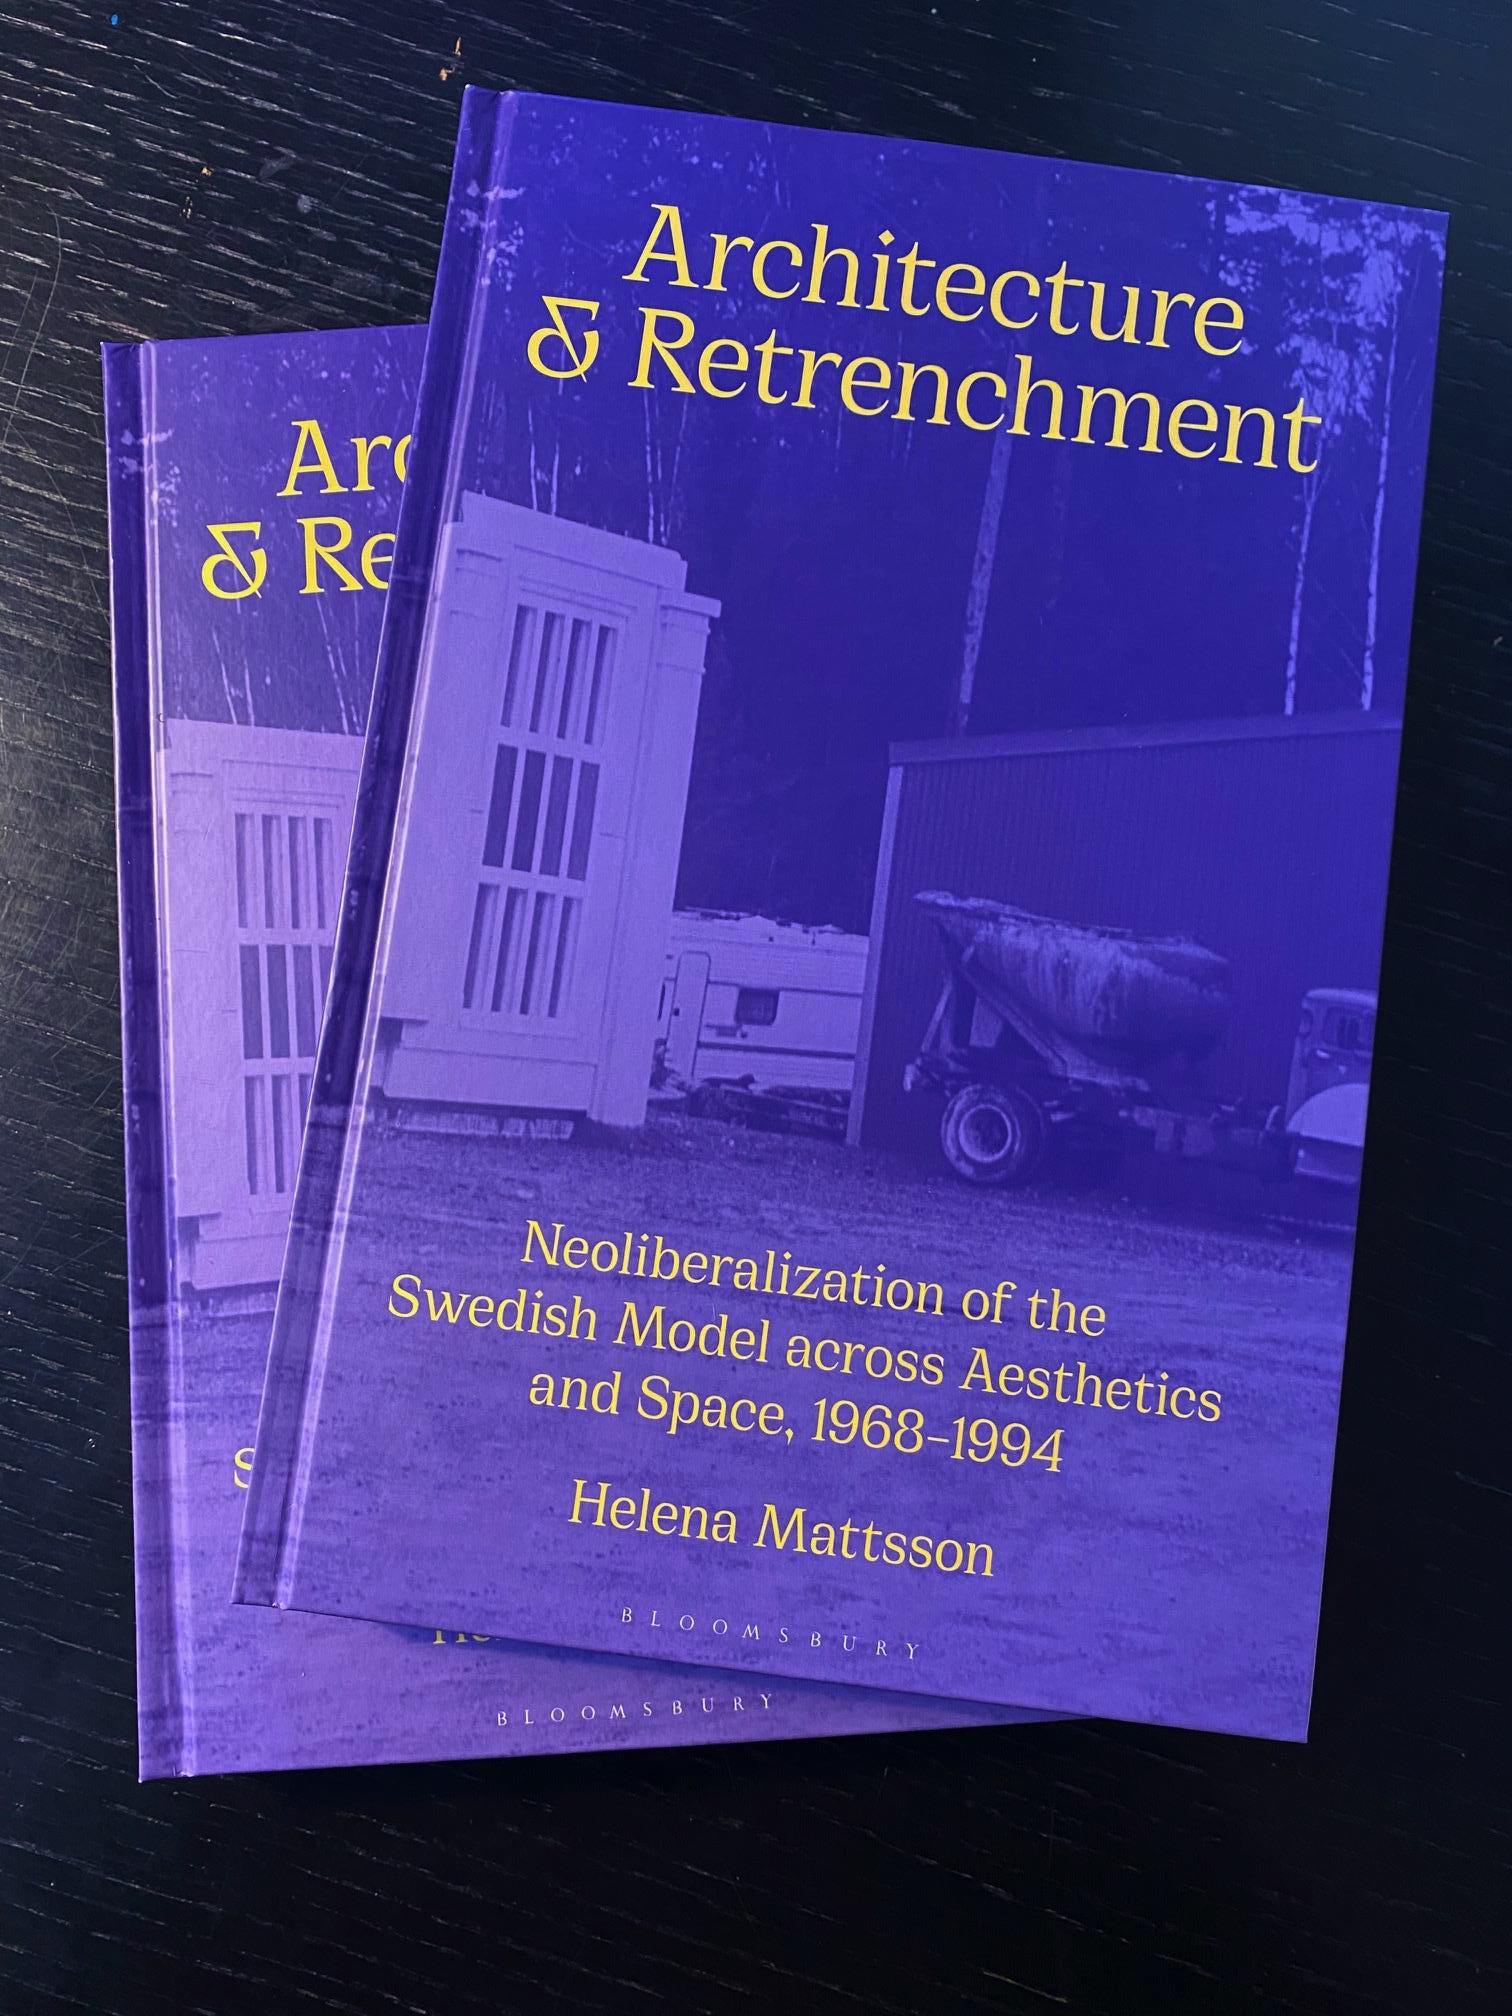 Architecture and Retrenchment: Neoliberalization of the Swedish Model across Aesthetics and Space, 1